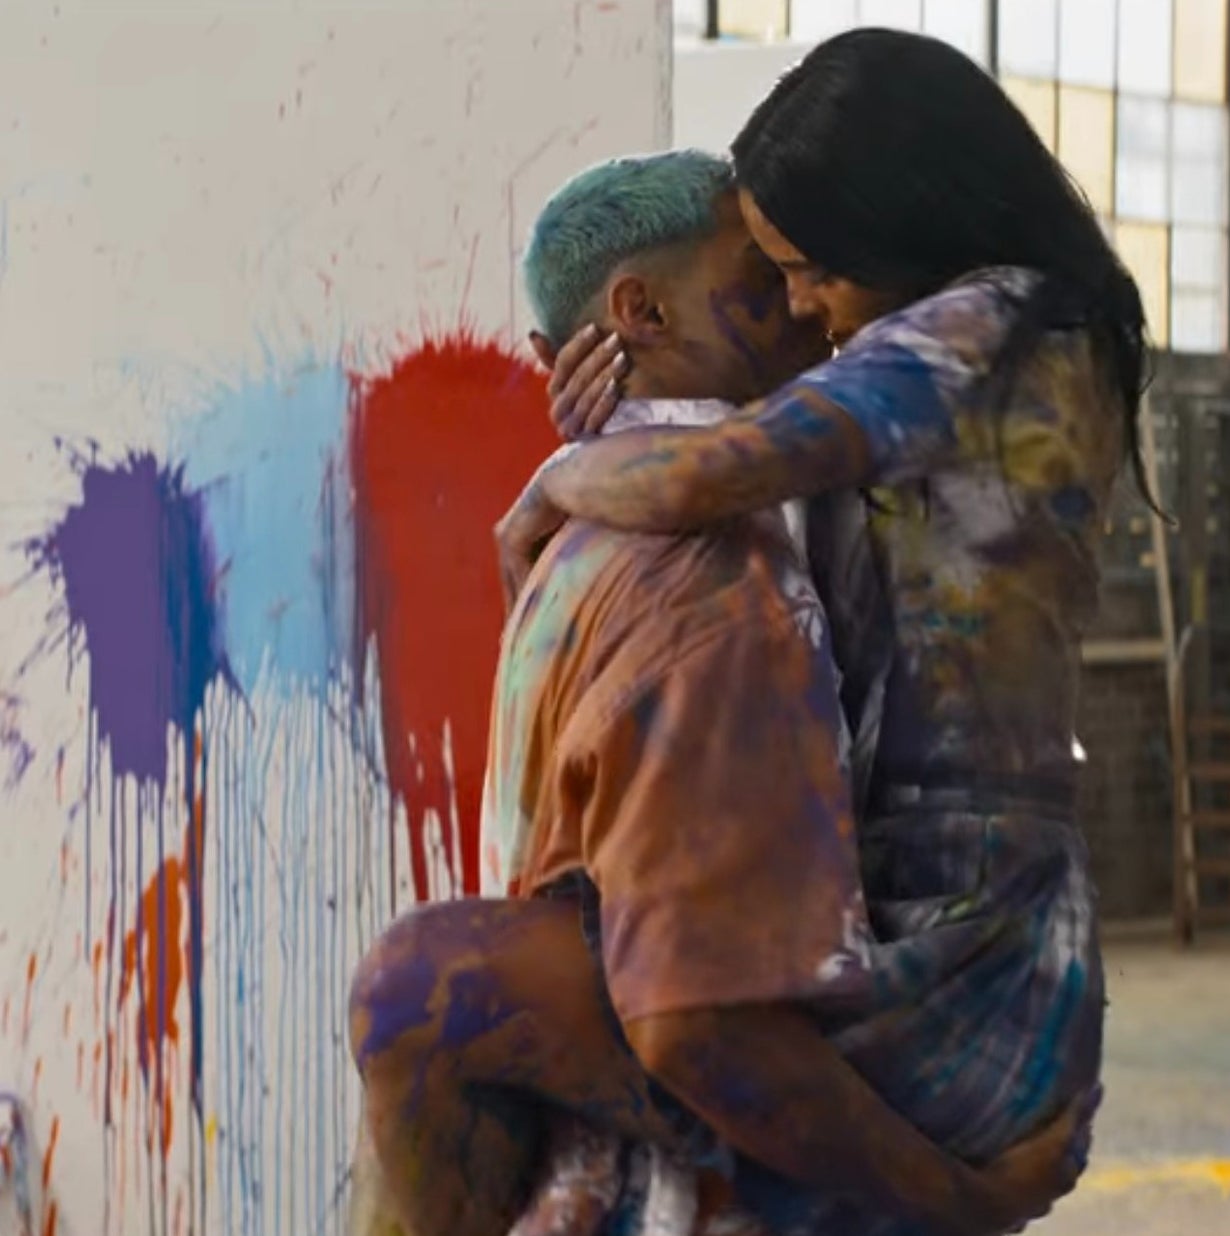 &quot;do revenge&quot; couple makes out after playing with paint